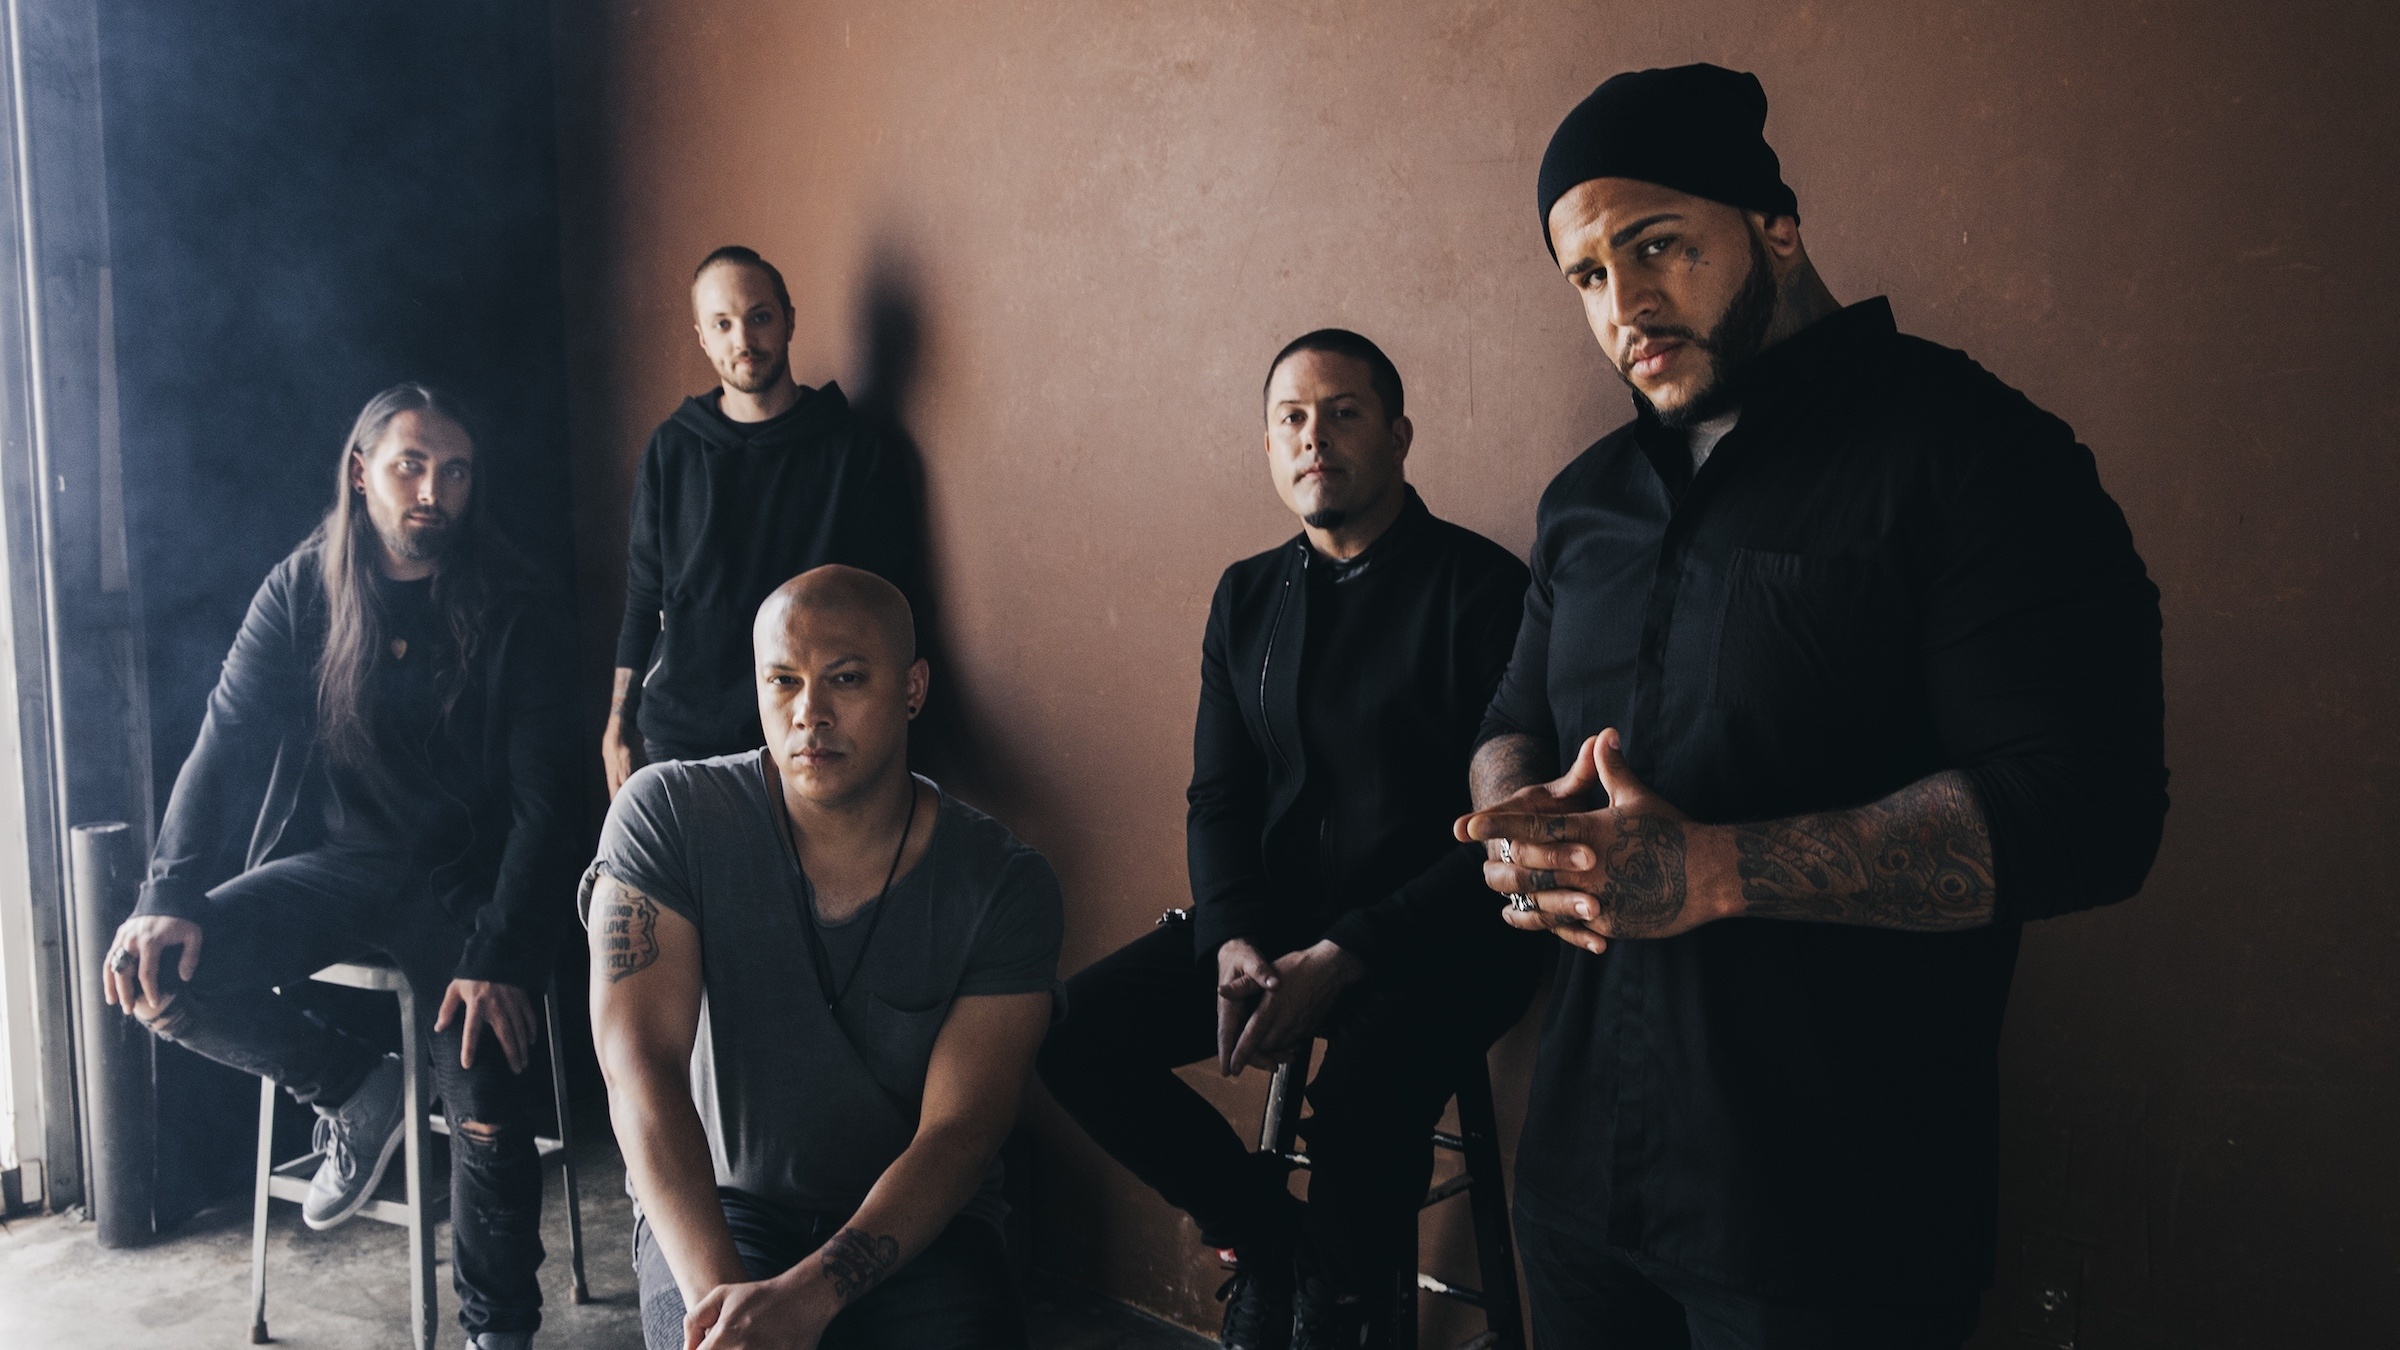 Bad Wolves, Split with Tommy Vext, Band announcement, Music news, 2400x1350 HD Desktop